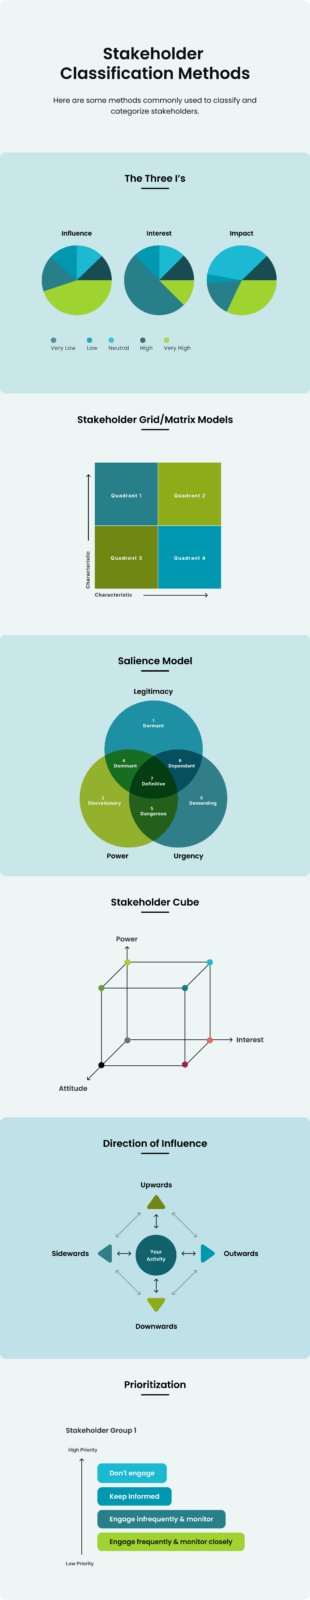 Infographic showing stakeholder classification methods - various models used to classify and categorize stakeholders.